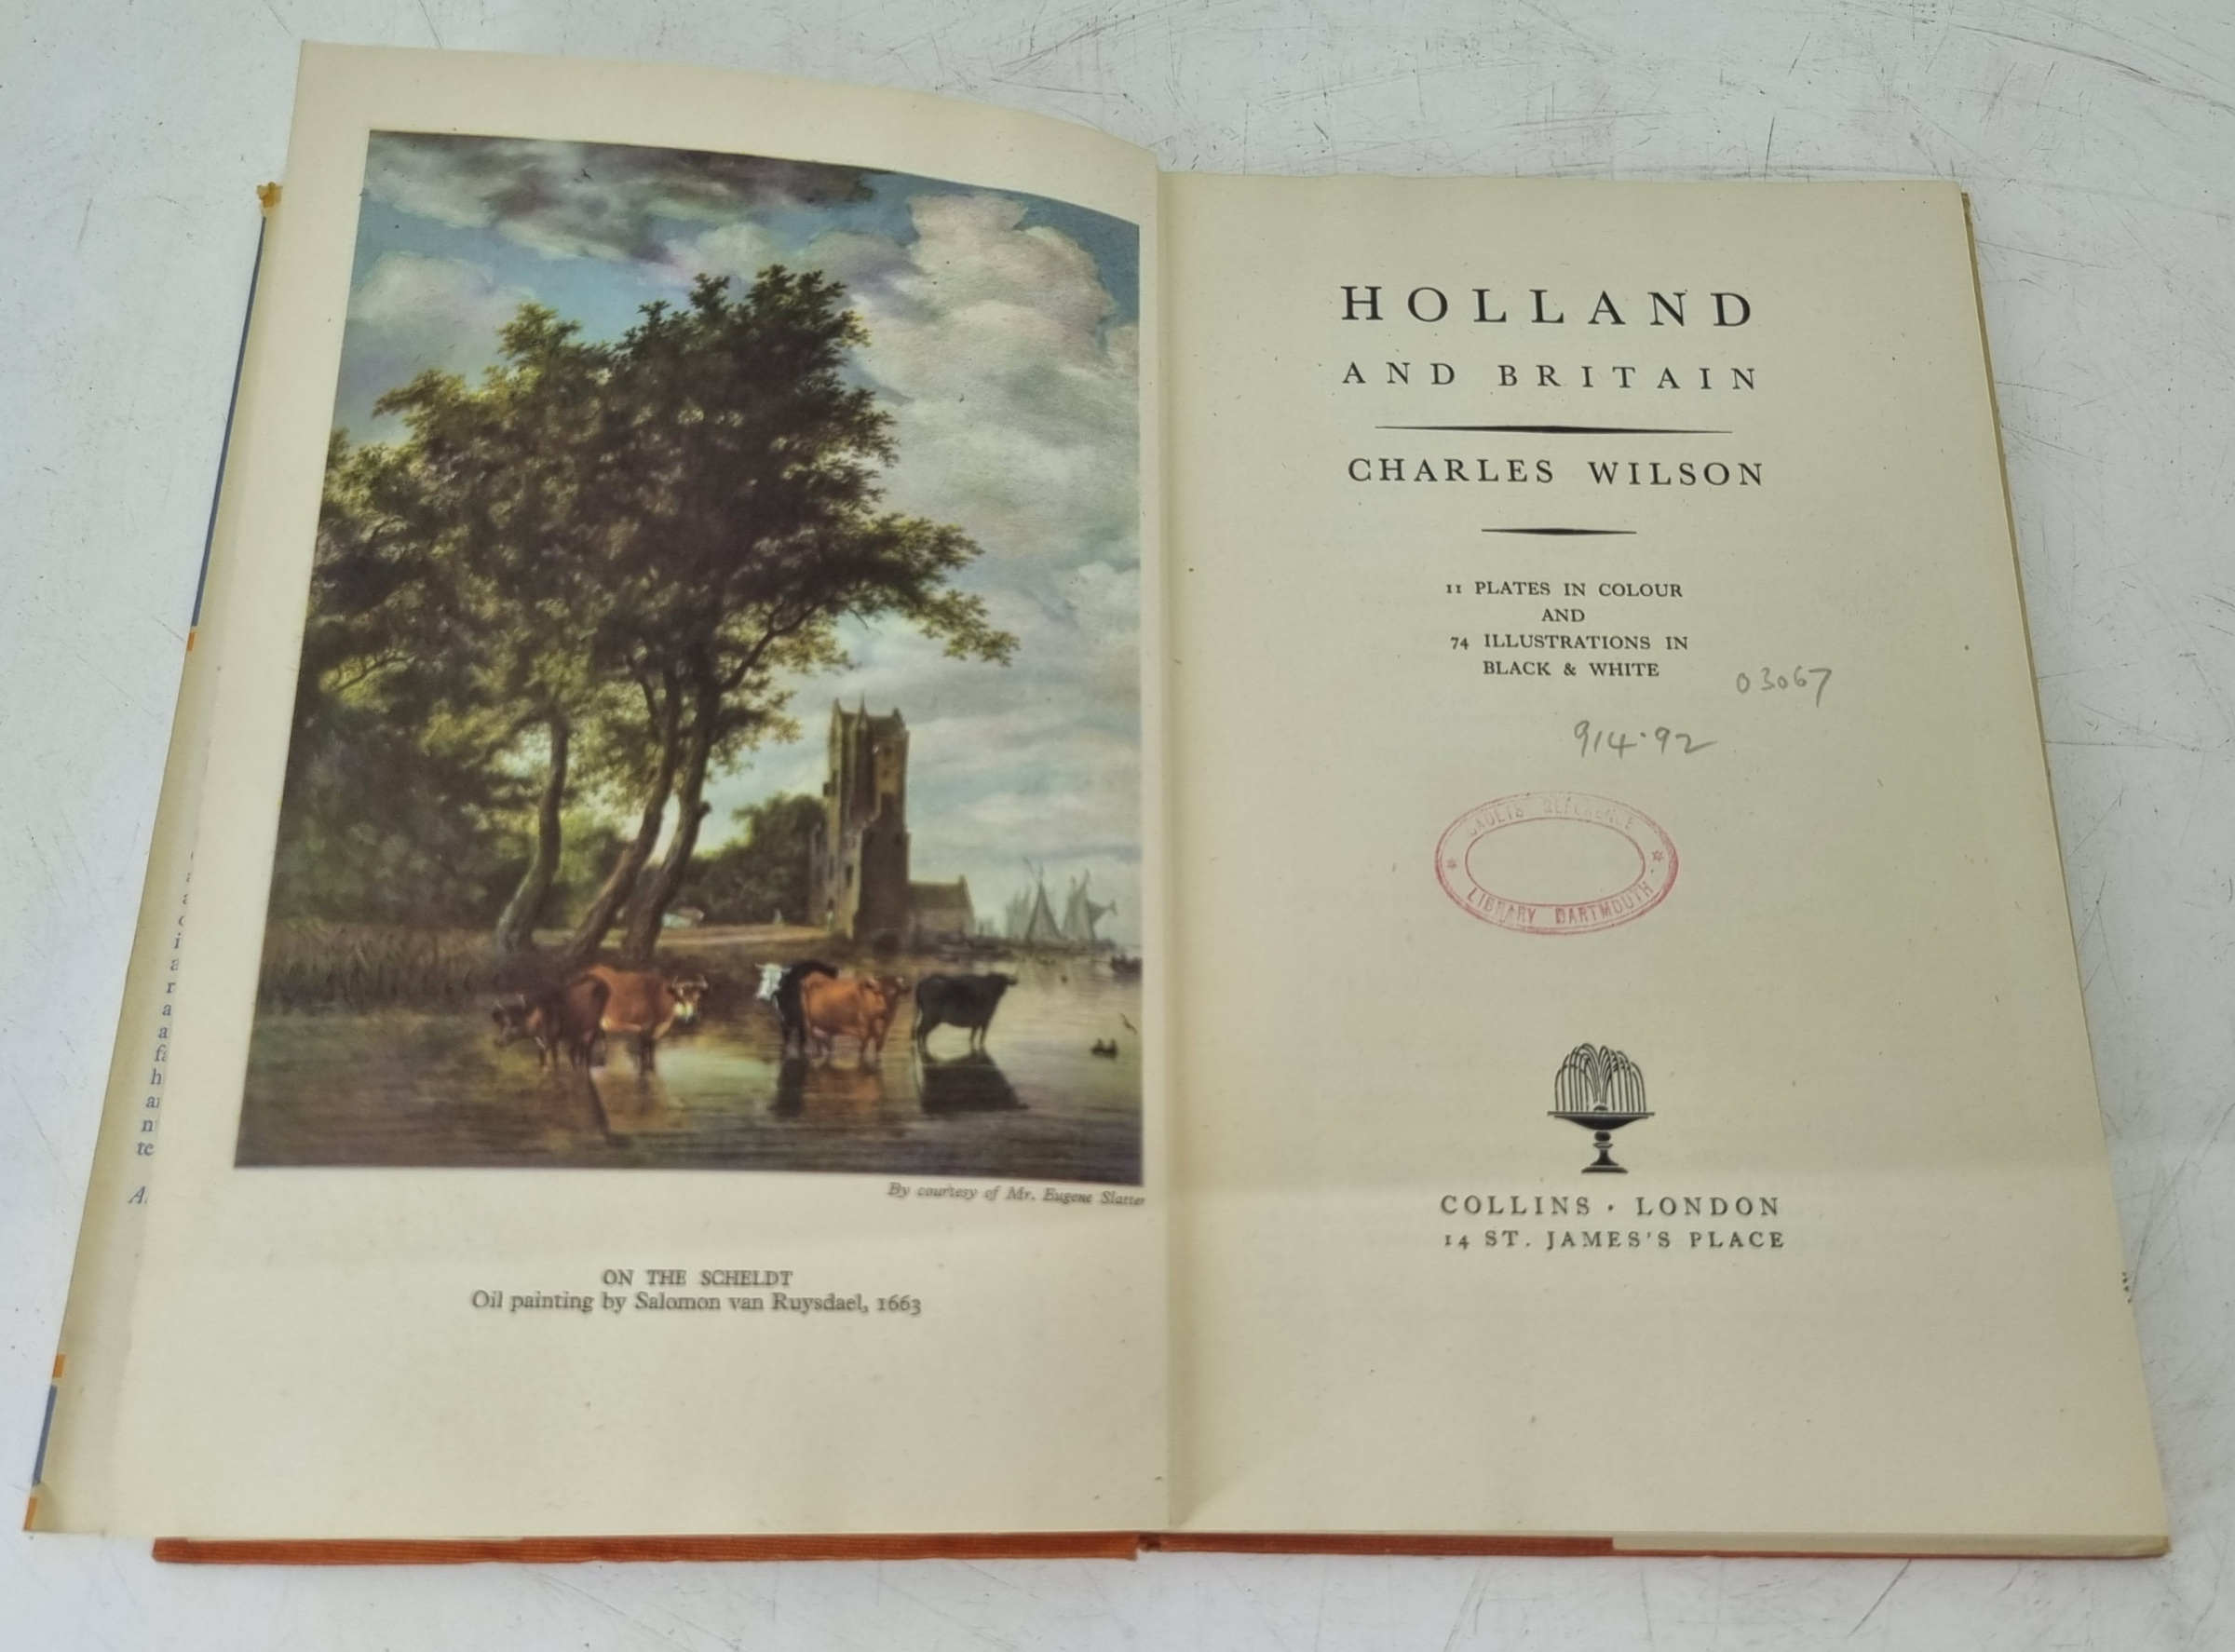 Holland & Britain by Charles Wilson, Journey Without Maps A Travel Book by Graham Greene - Published - Image 3 of 18